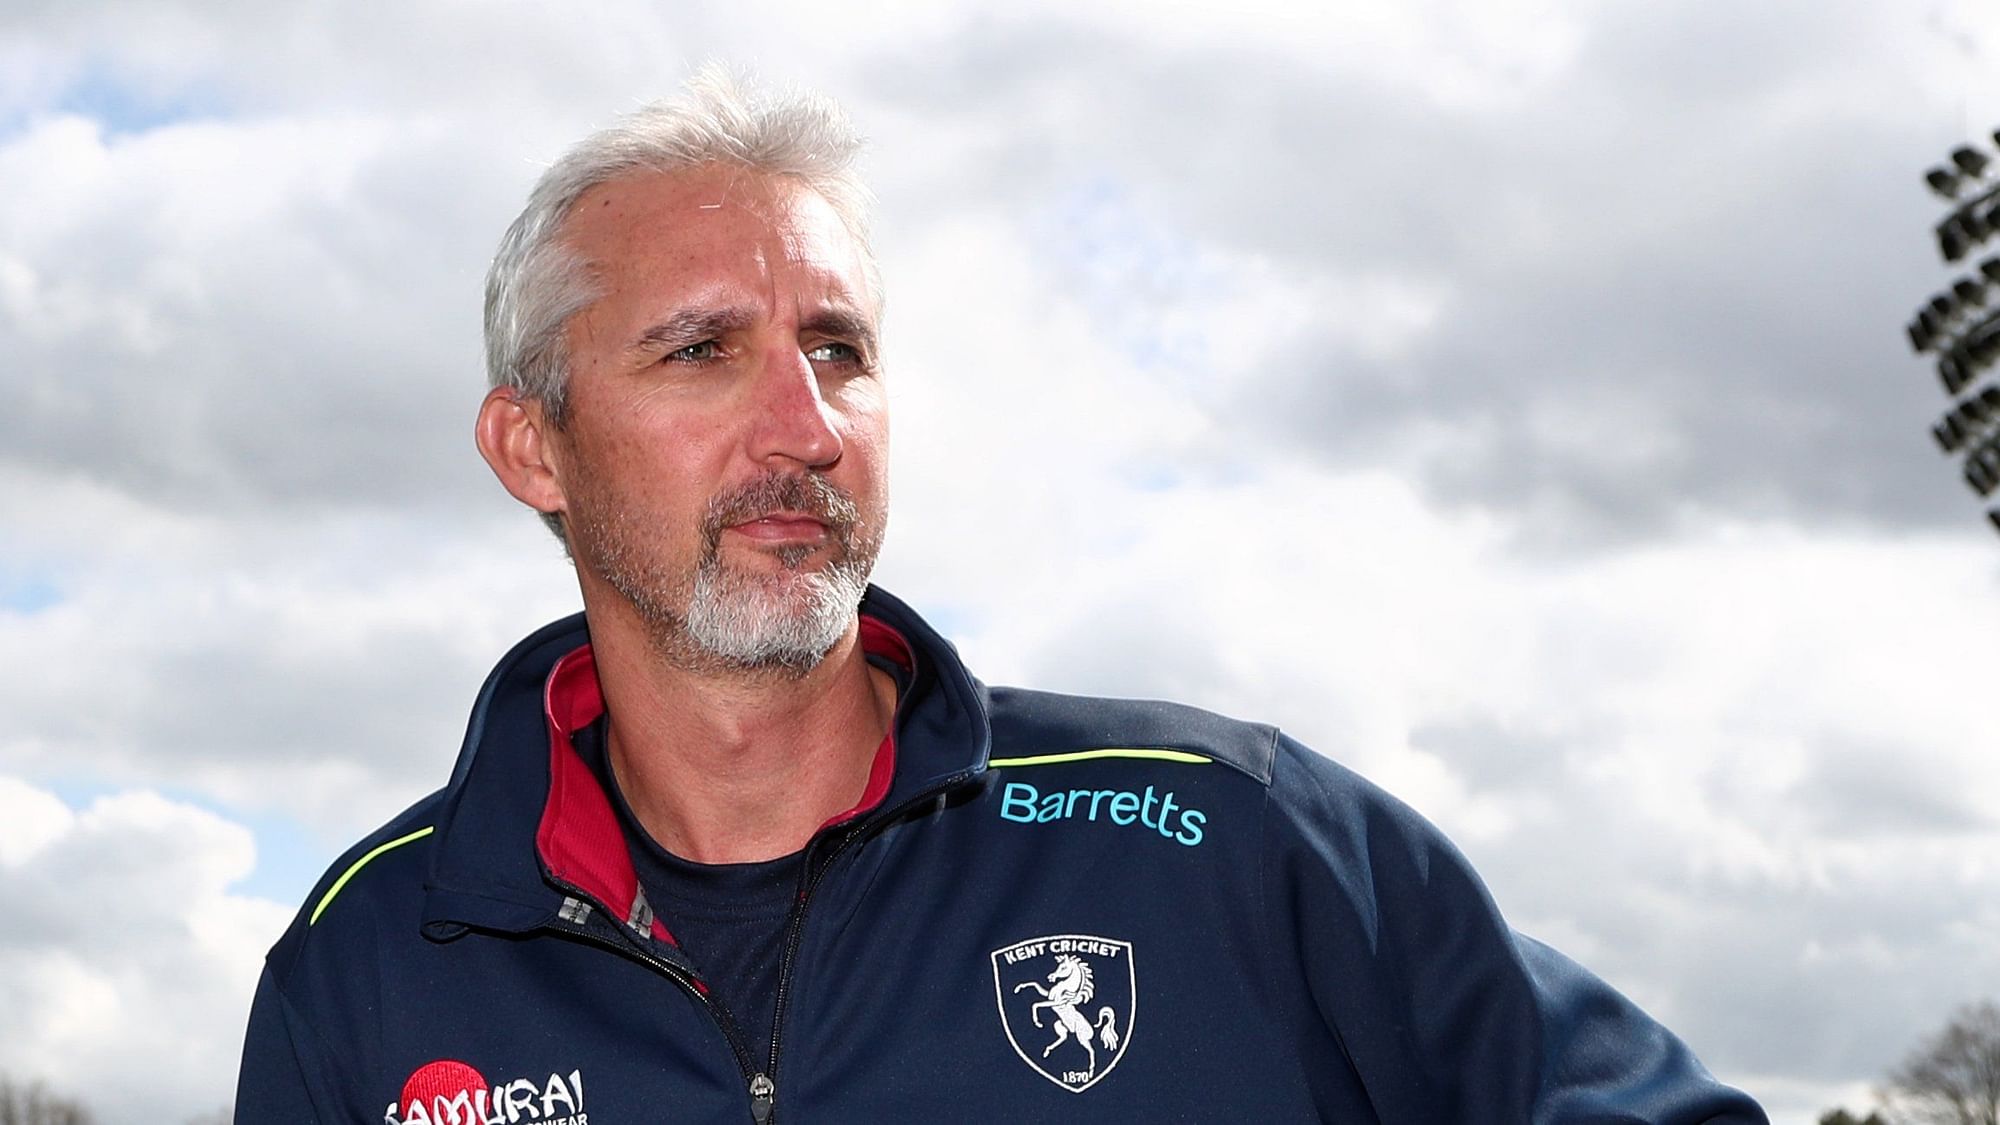  Jason Gillespie was very impressed with Ishant Sharma’s “thirst for knowledge” when he played English county under his coaching.